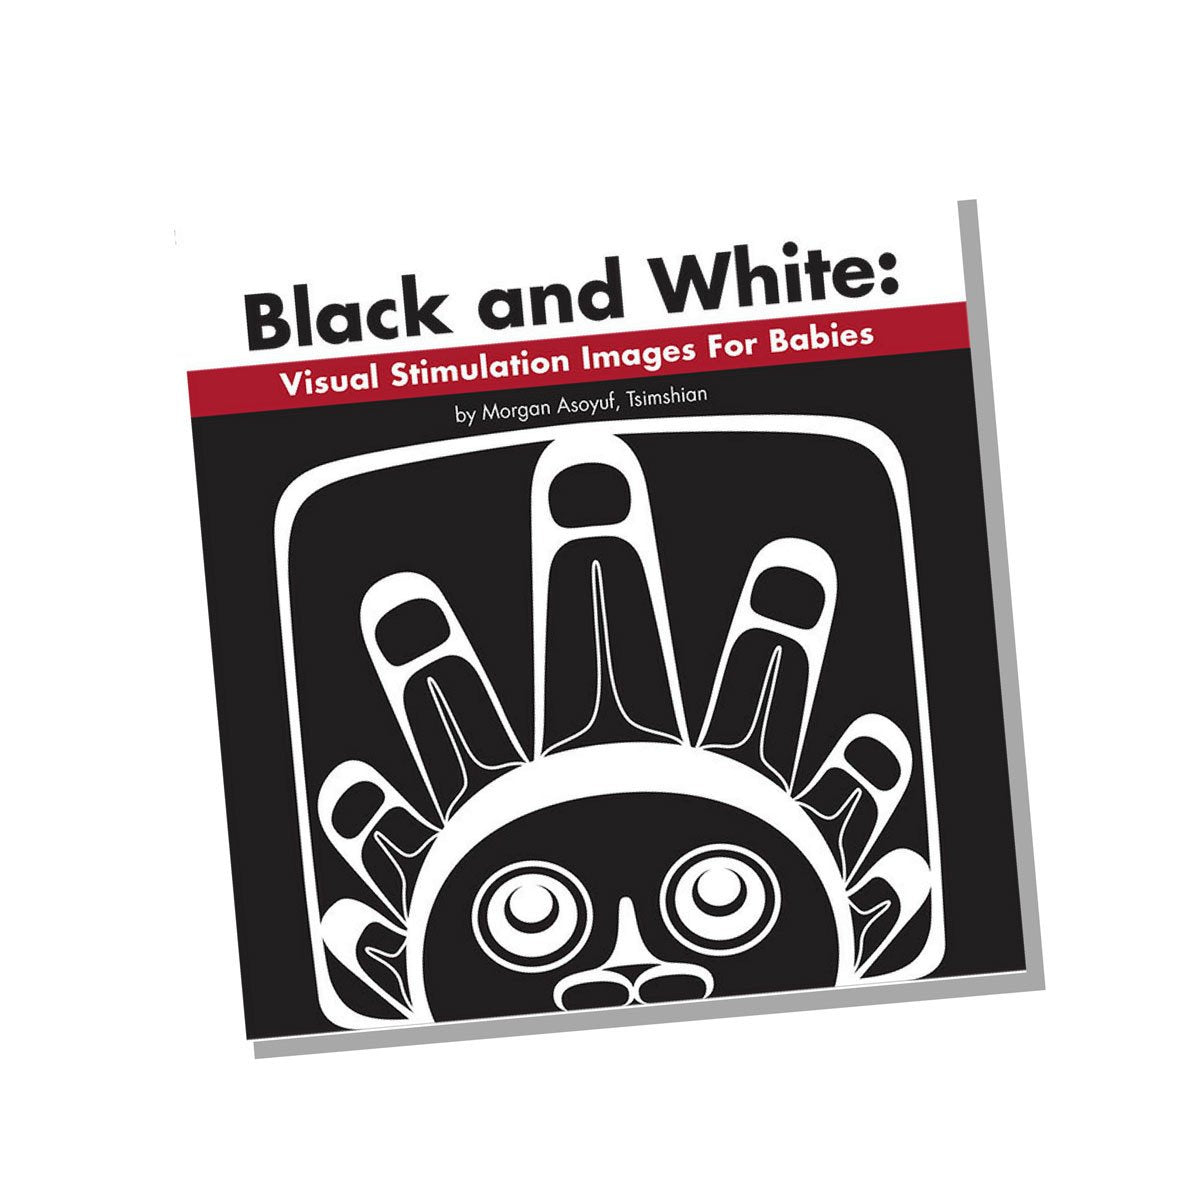 Board Book | Black and White: Visual Stimulation Images for Babies by Morgan Asoyuf